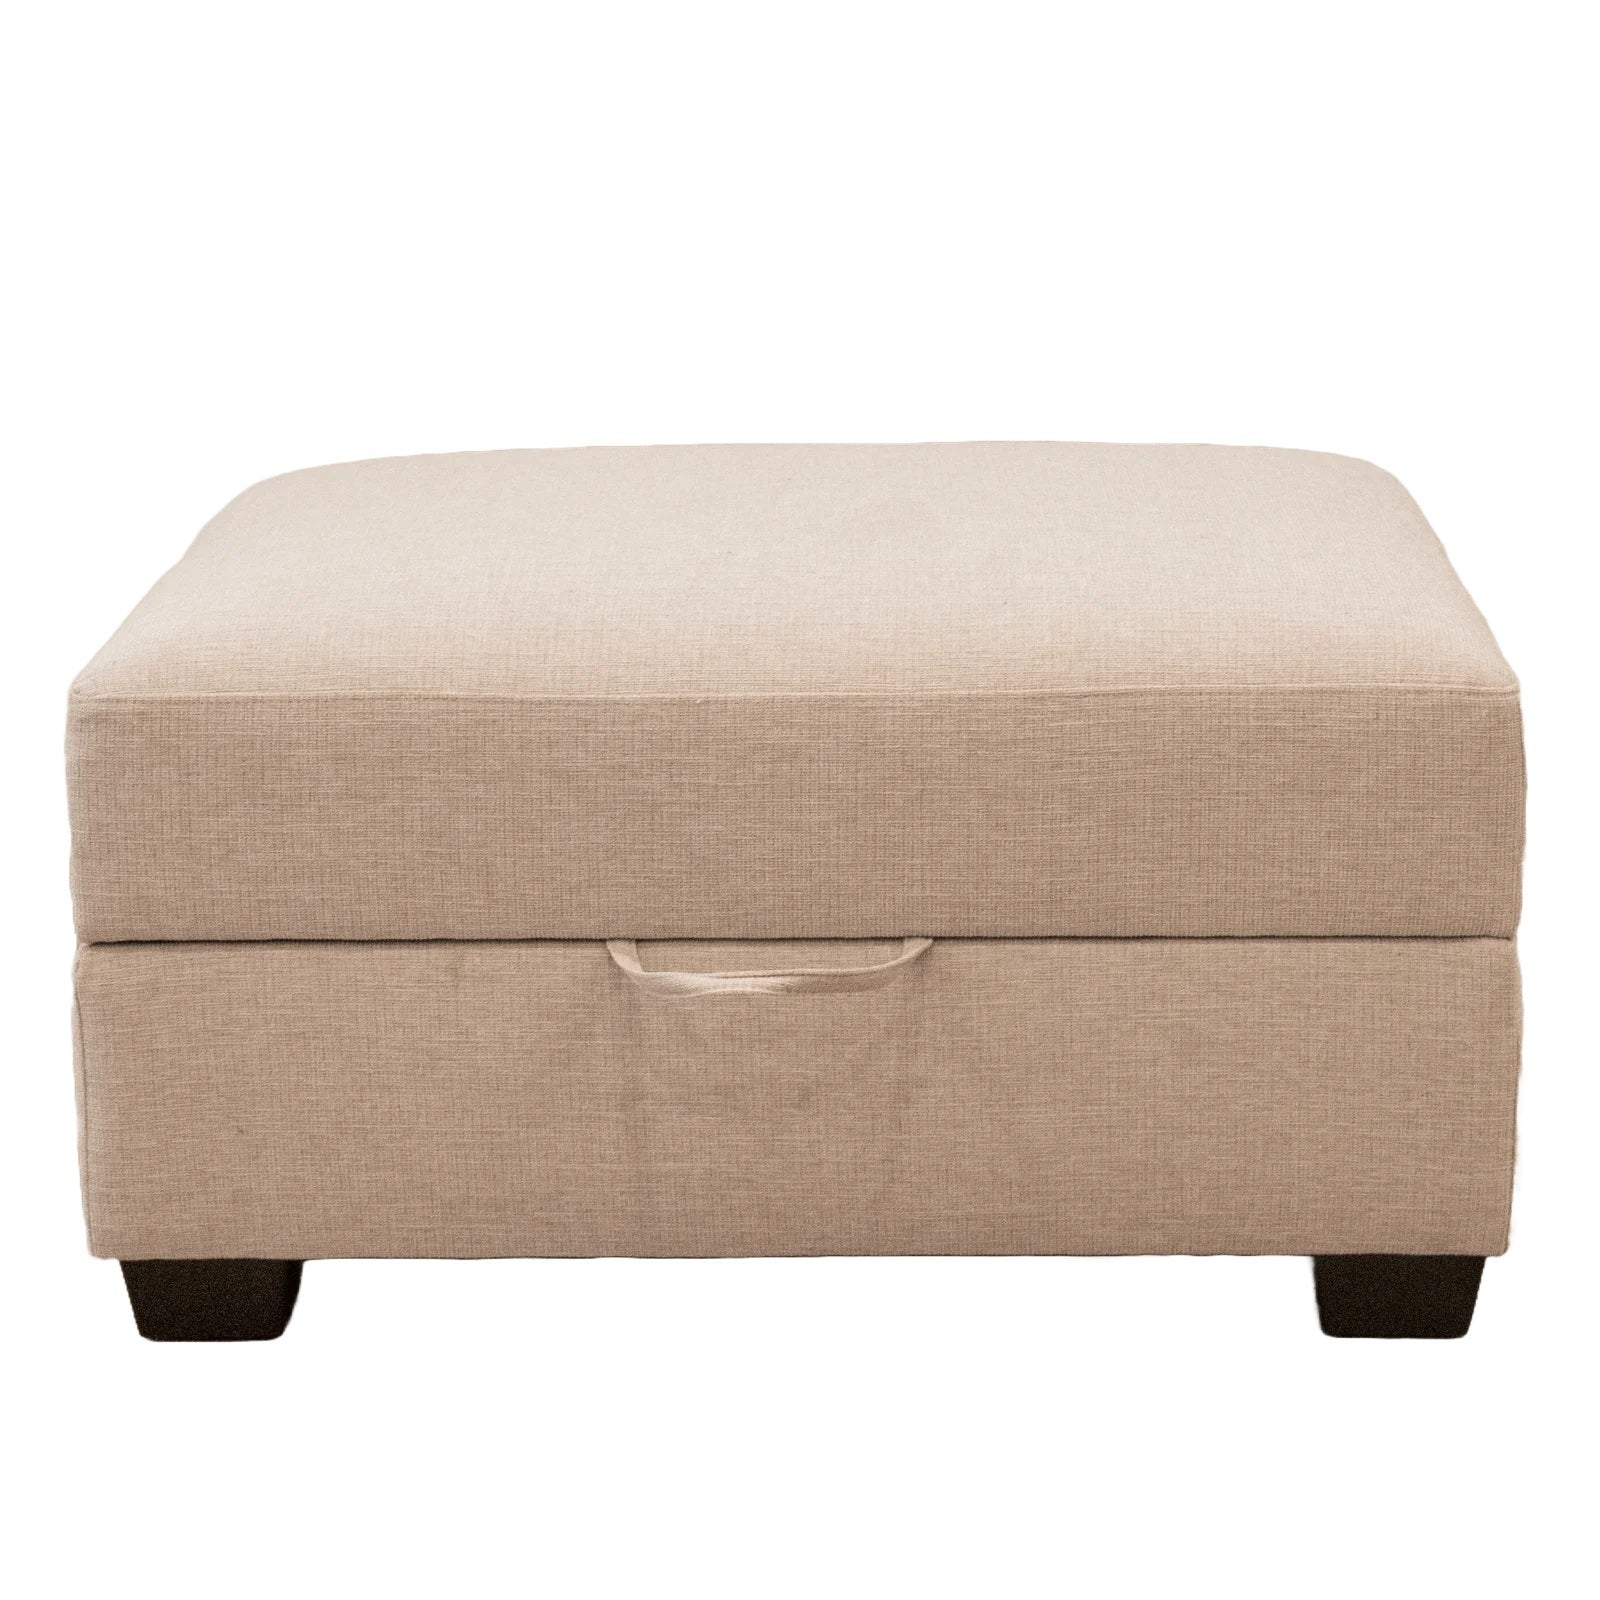 Classic Living Room Storage Ottoman, Fabric brown-wood-primary living space-solid-beige-with